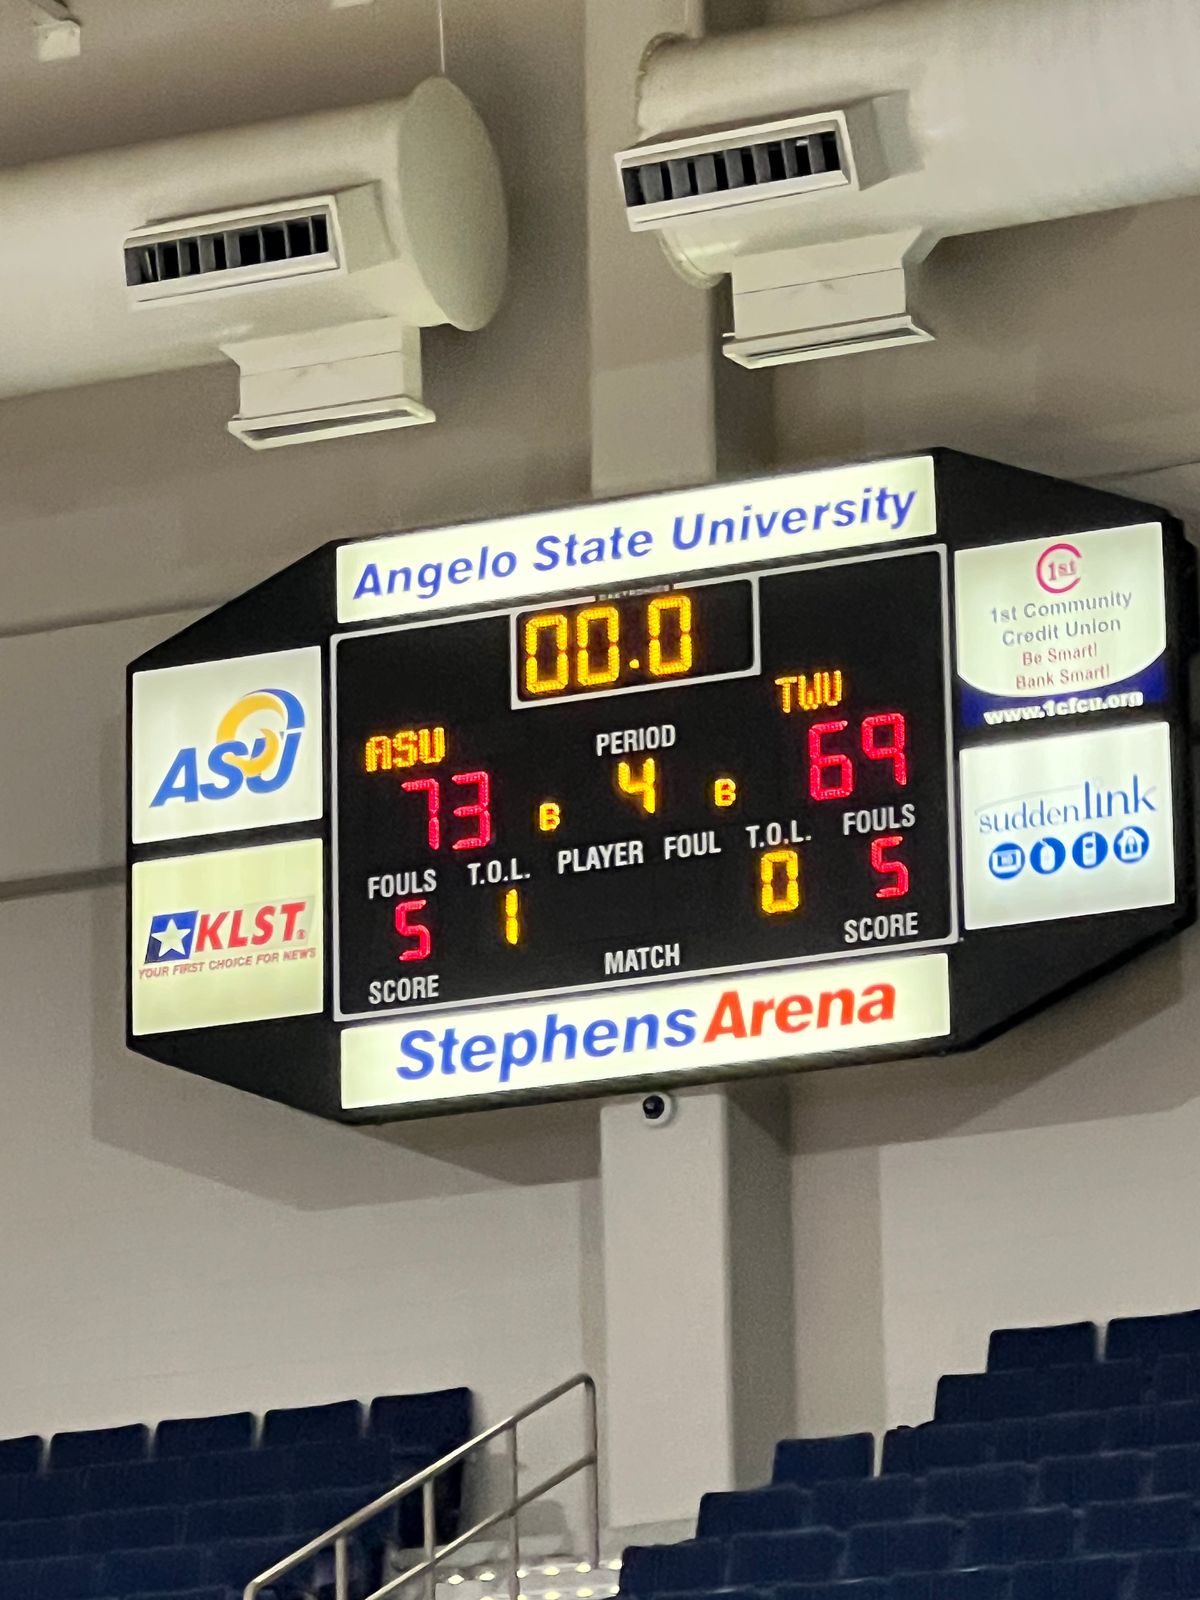 Lloyd's 34 points powers Angelo State past #4 Texas Woman's